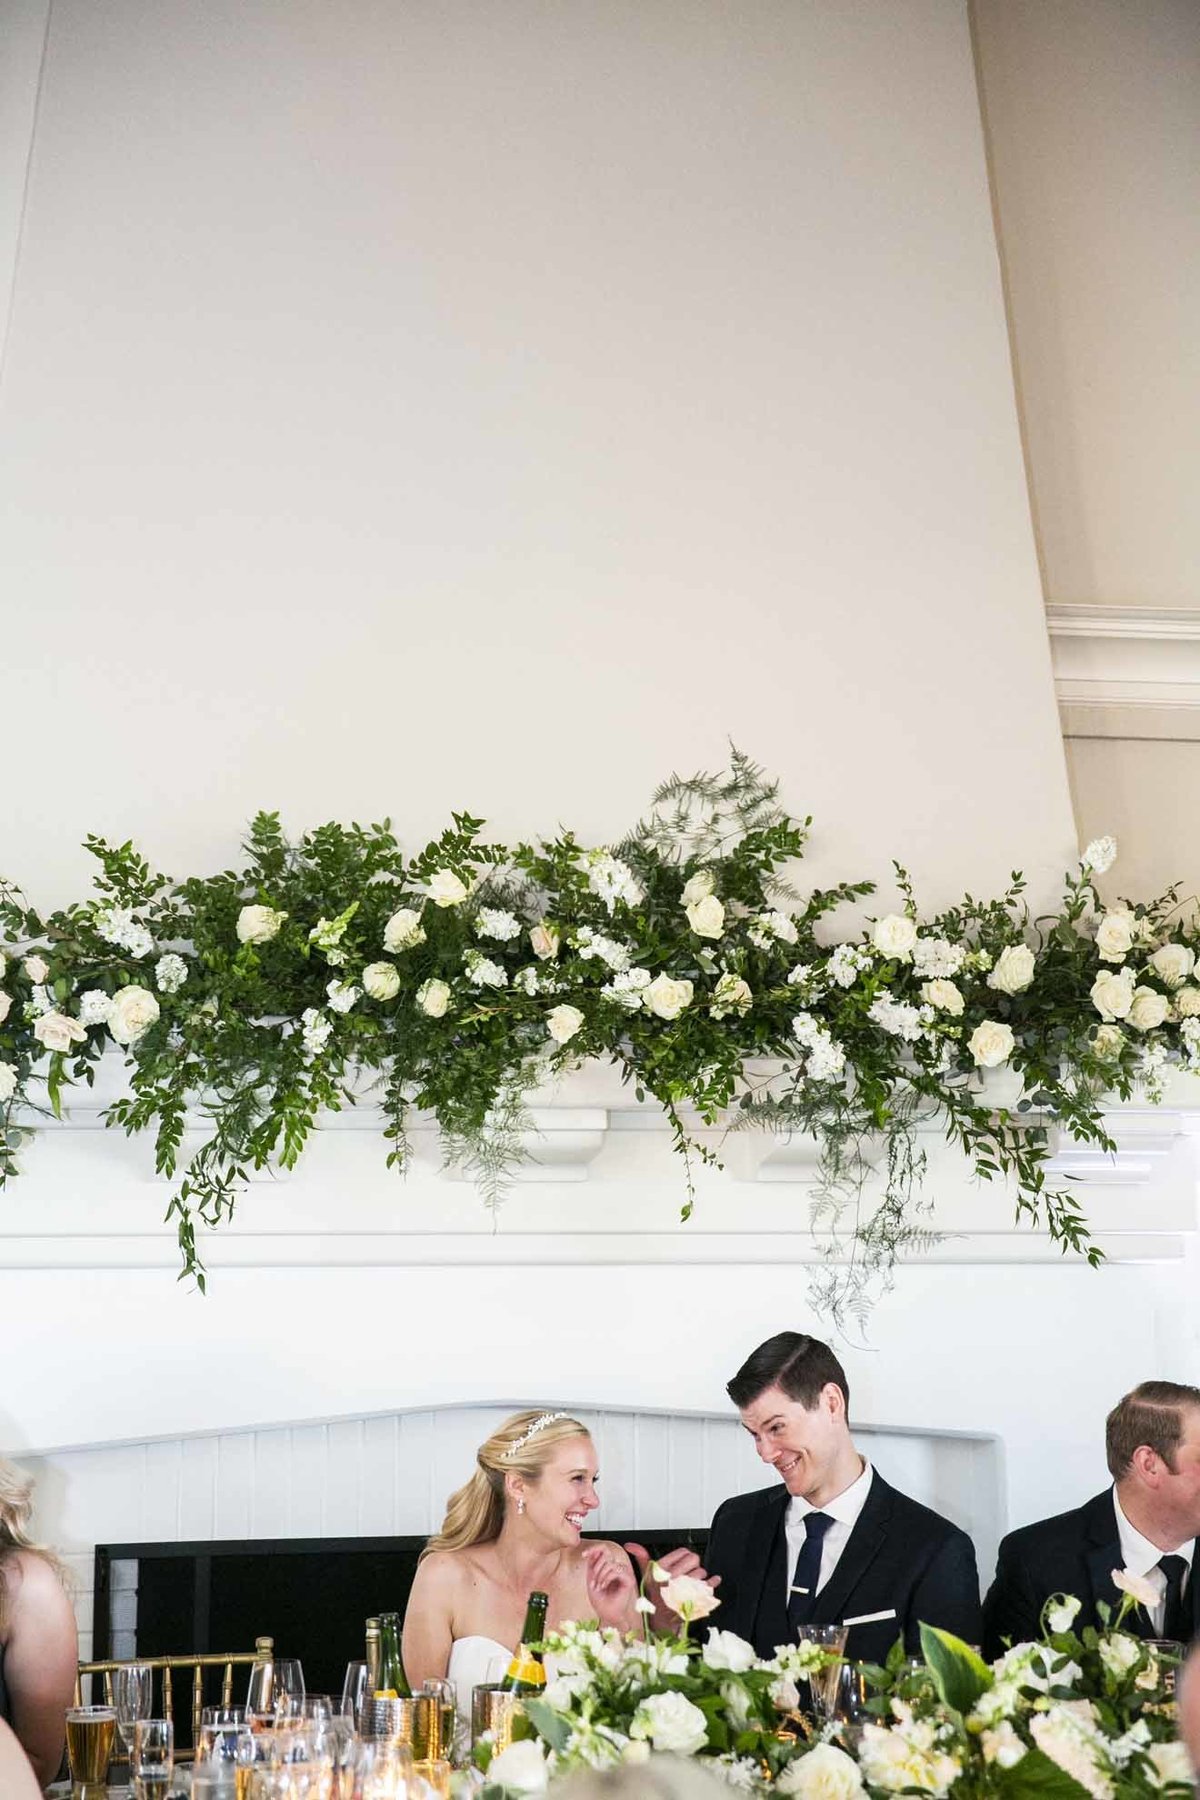 a large wedding arch is framing the bride and groom at their head table, featuring white flowers and greenery